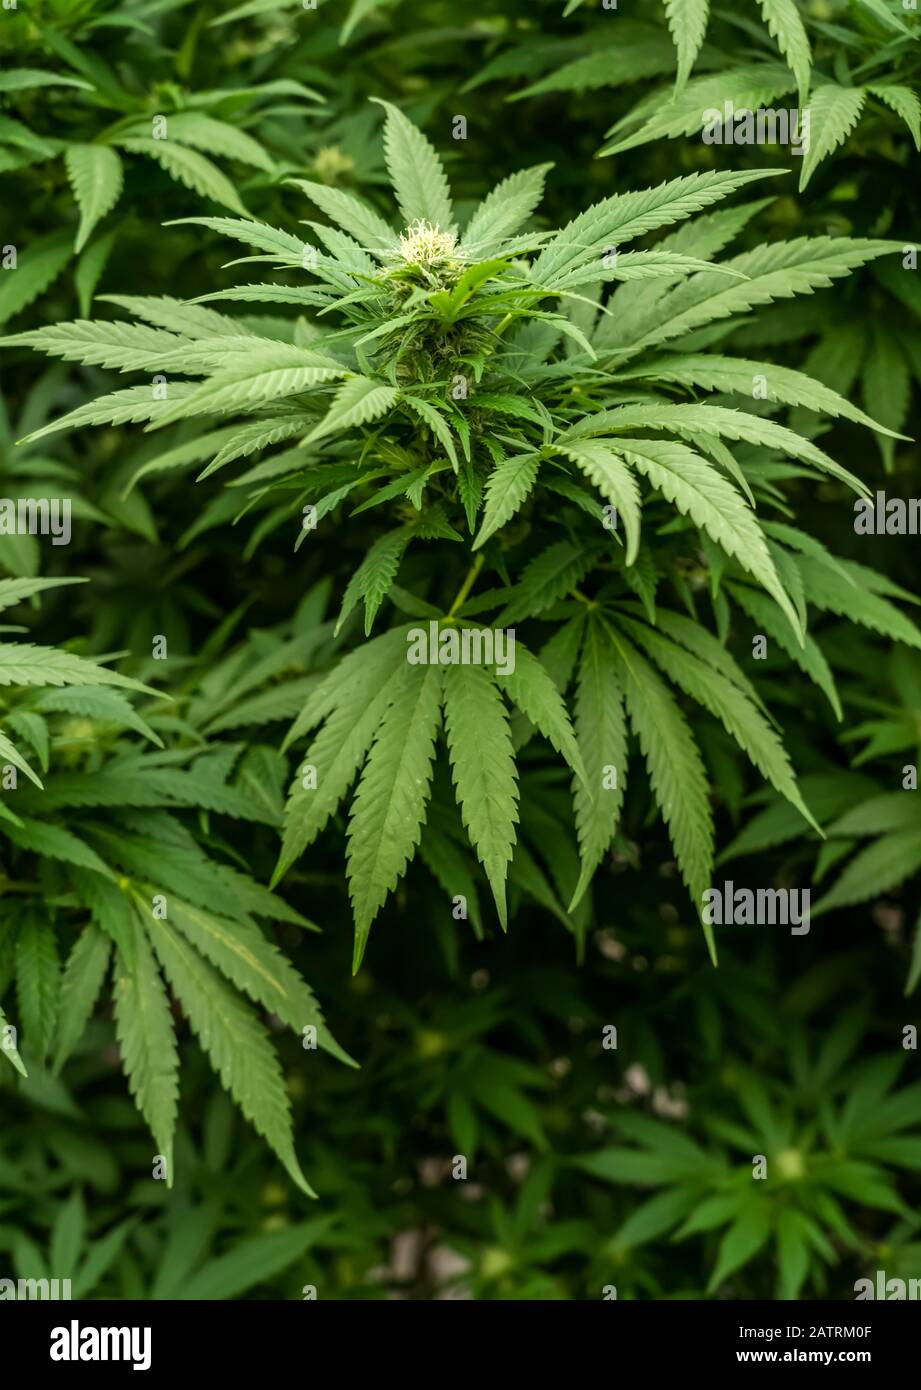 Cannabis plant with prominent flower pistils indicating advancing maturity; Alberta, Canada Stock Photo